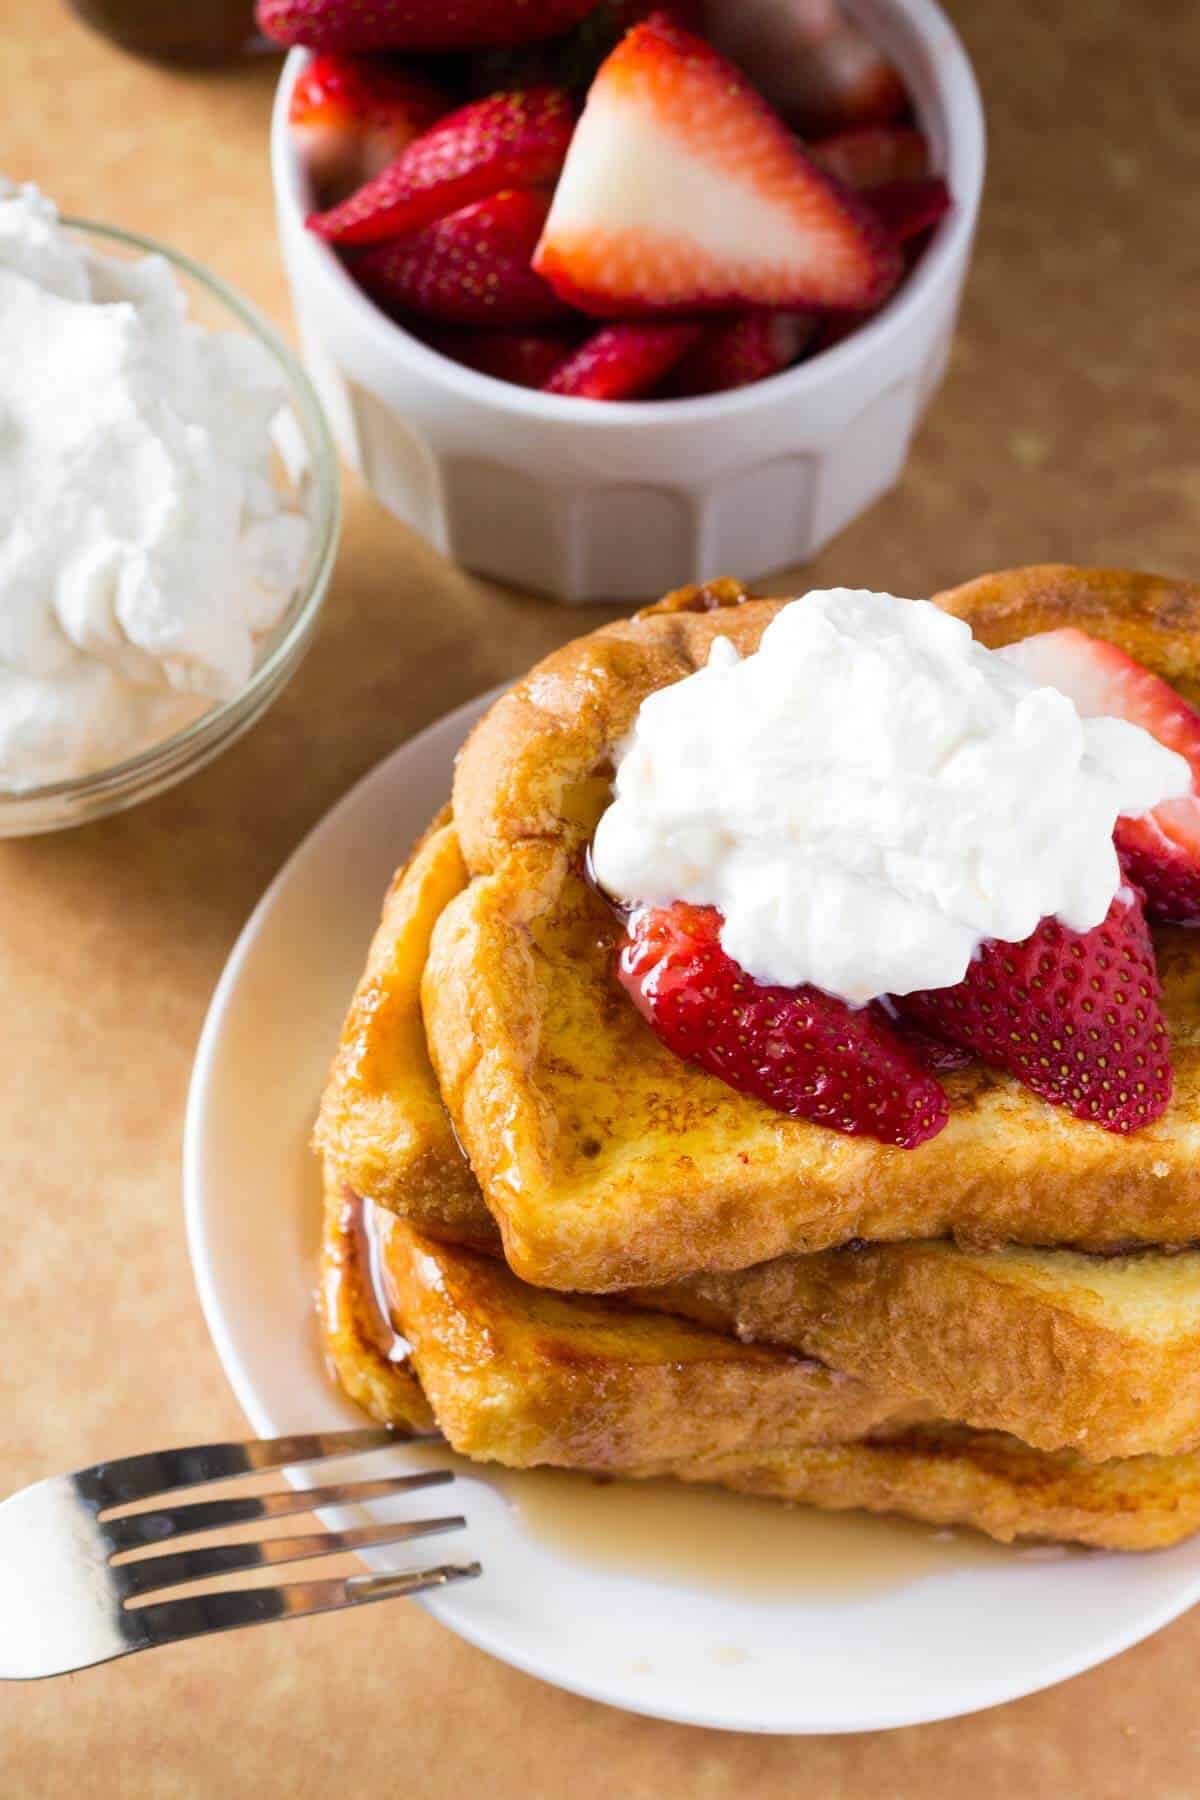 The BEST French Toast - fluffy, buttery, golden brown, topped with maple syrup and the best reason to get out of bed!